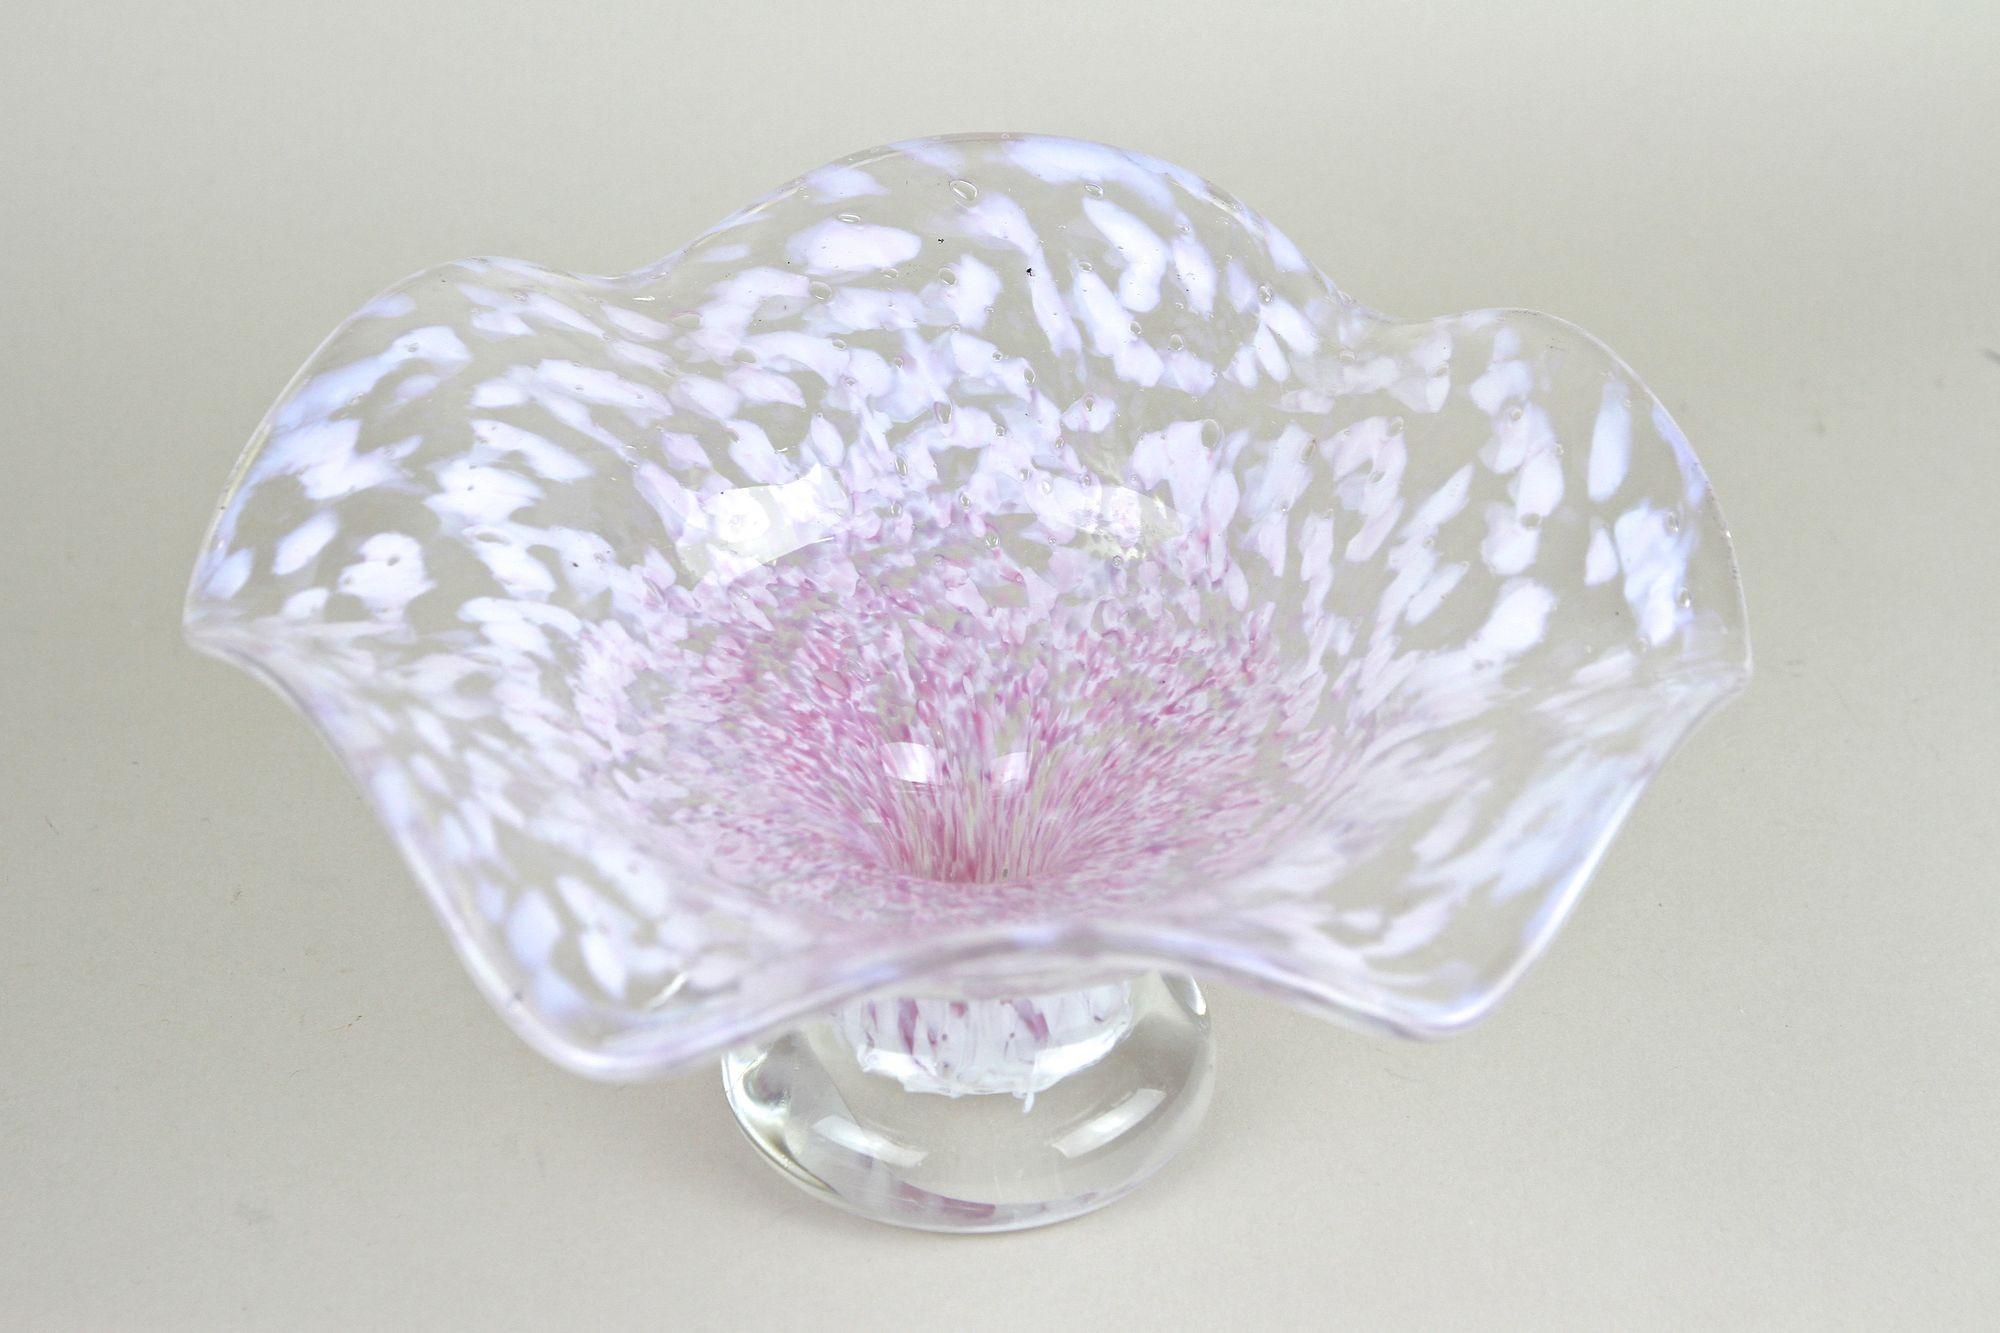 Mid-Century Modern Murano Glass Centerpiece/ Glass Bowl, Late Mid Century, Italy ca. 1960/70 For Sale